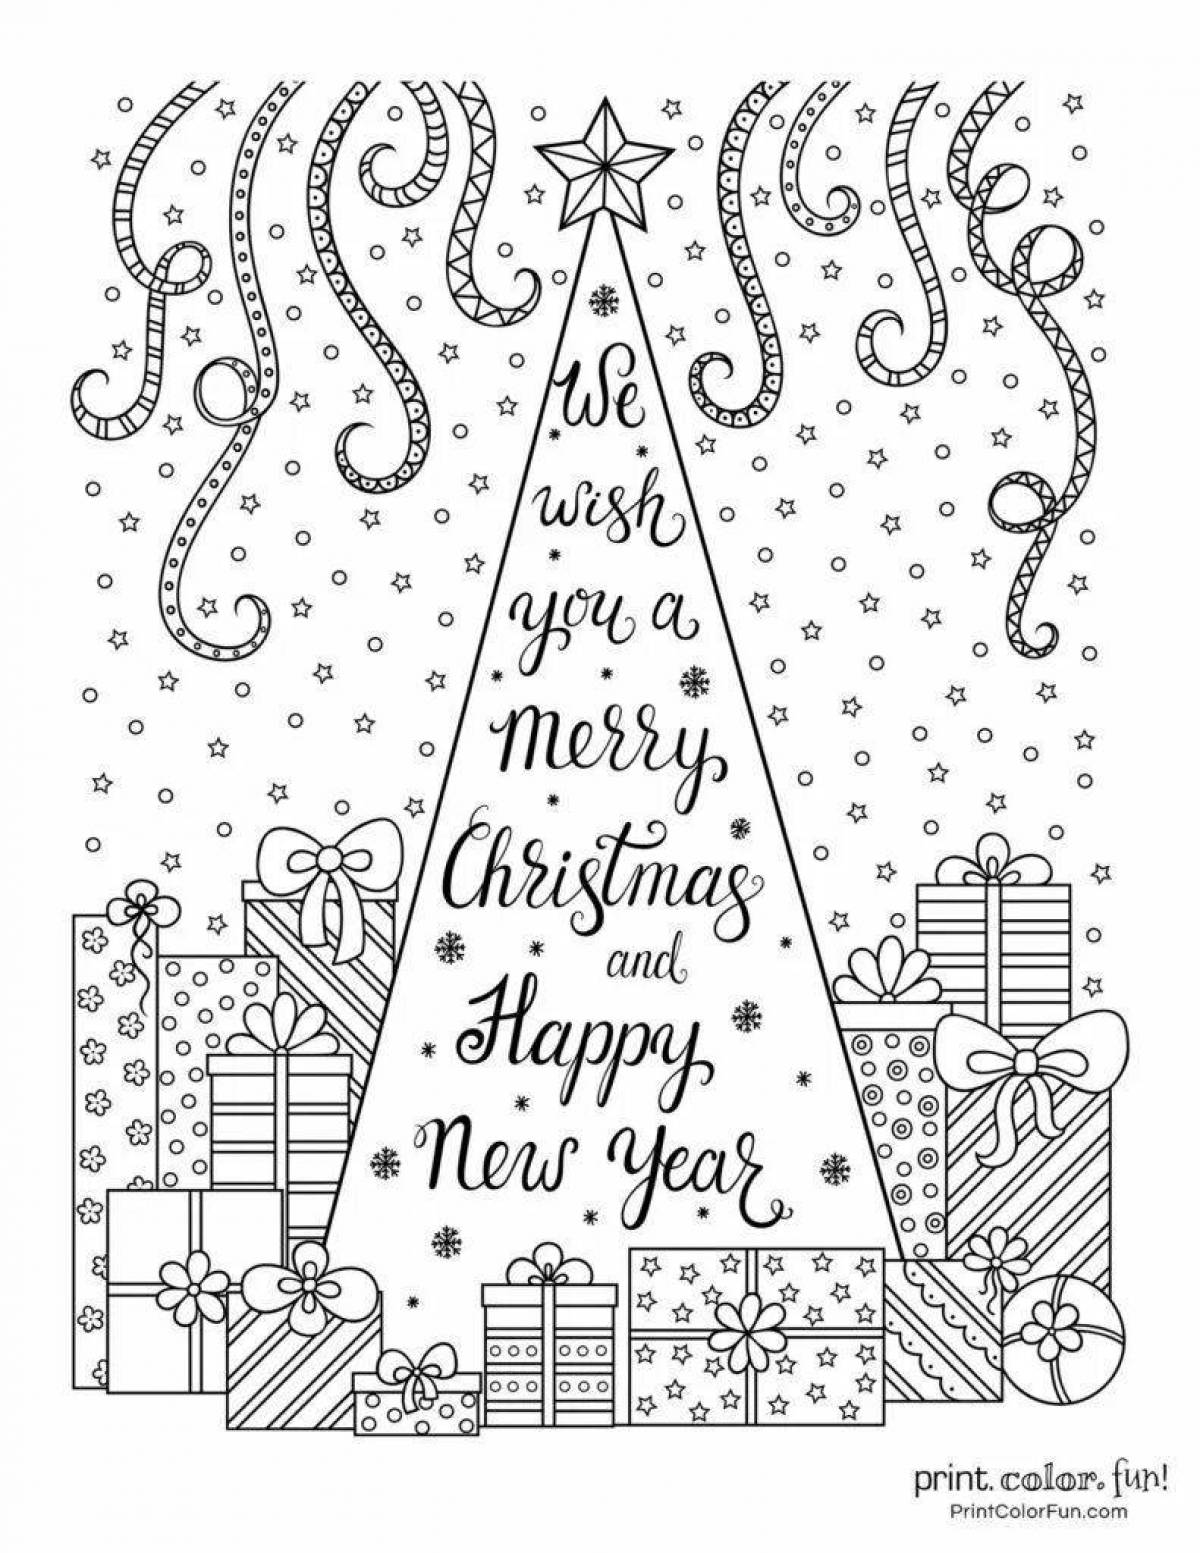 Exciting merry christmas and happy new year coloring book